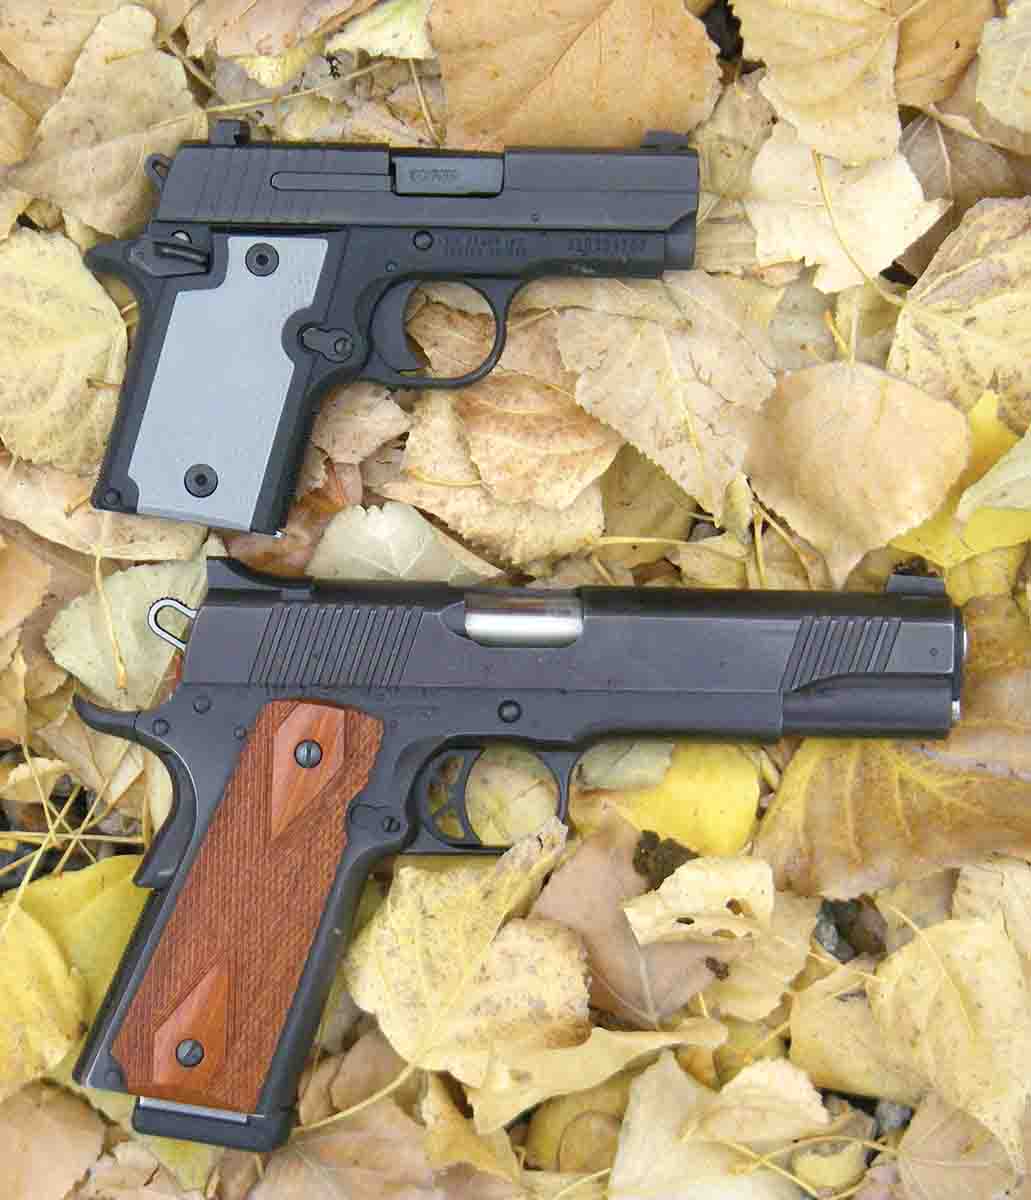 The SIG Sauer P938 (top) is a subcompact 9mm Luger patterned after the widely popular Model 1911 .45 ACP (bottom).